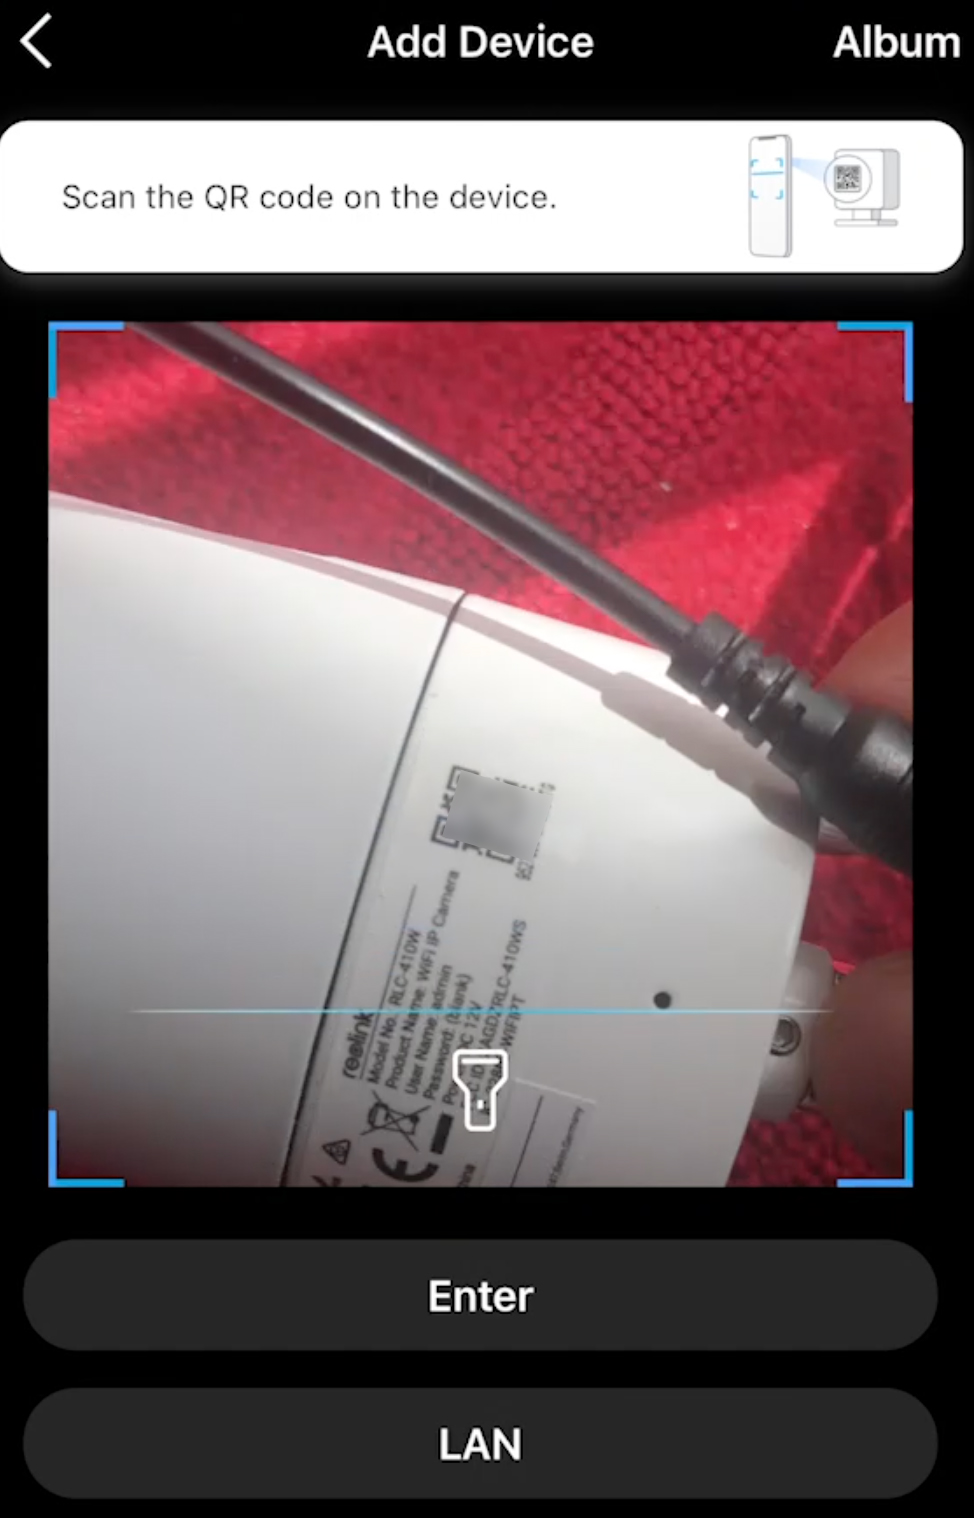 Scanning the barcode of the camera using the reolink app